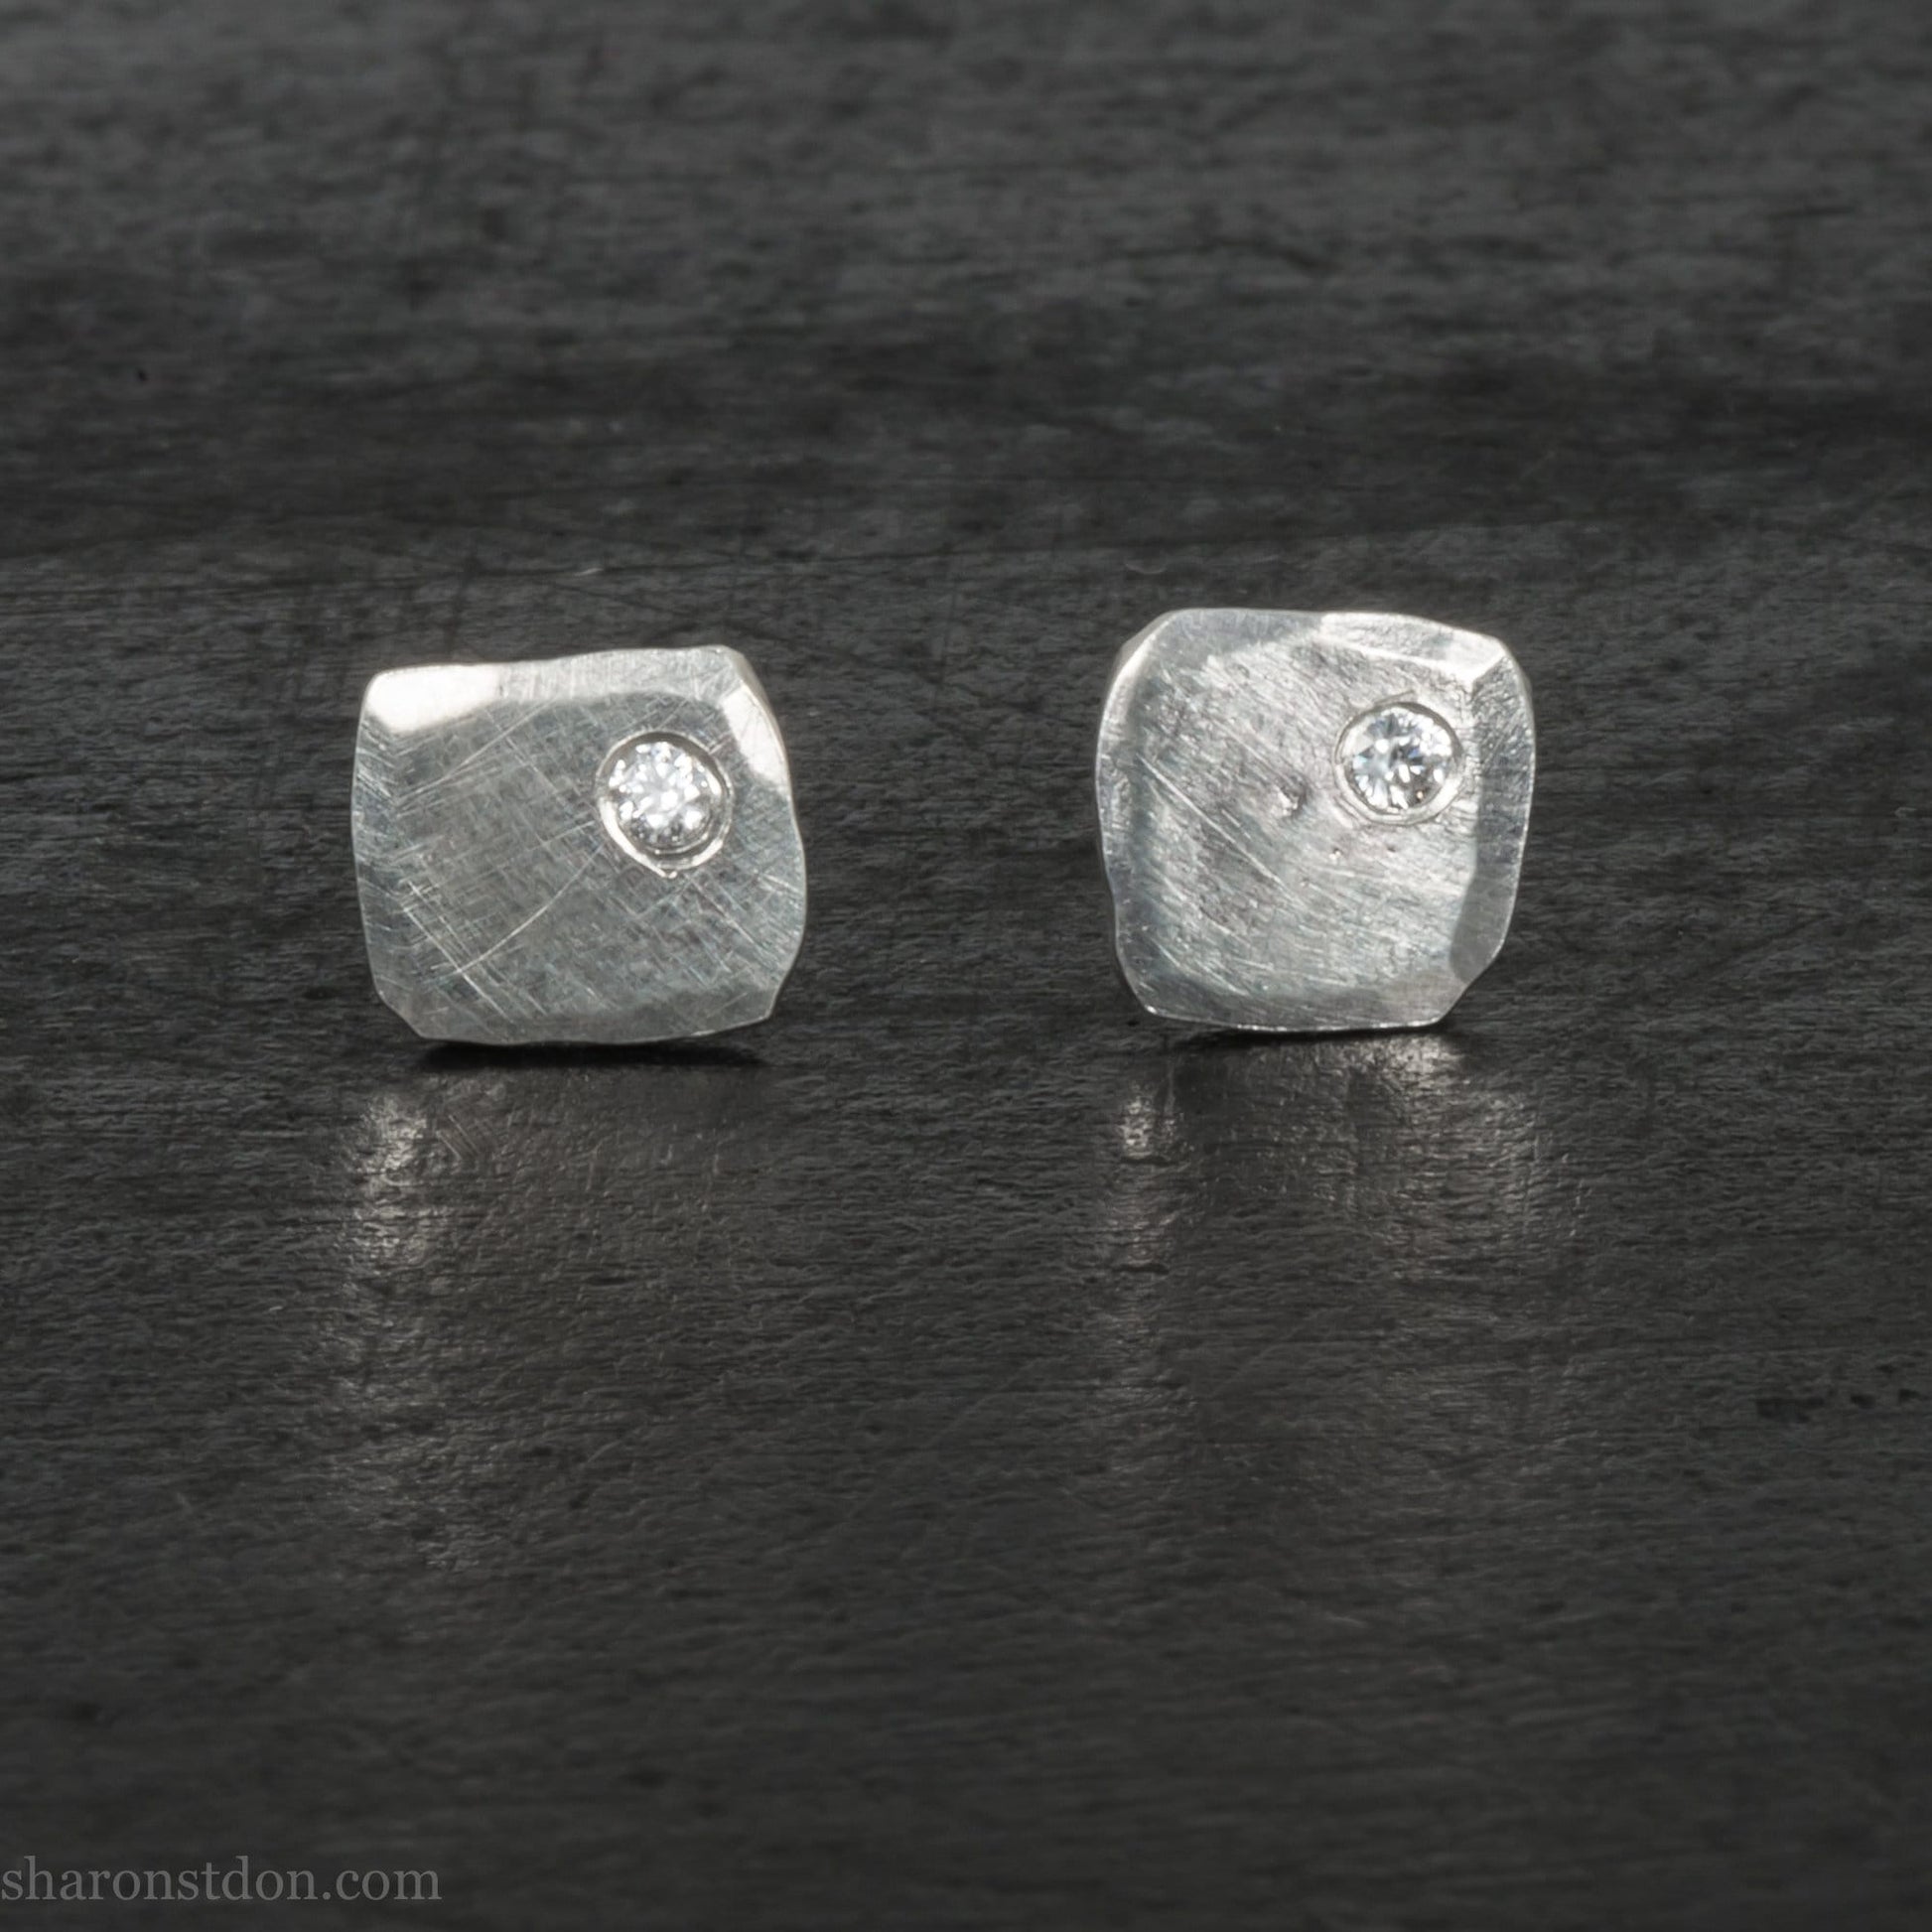 7mm square 925 sterling silver stud earrings with imitation diamond in the corner. Hammered texture with a matte, shiny finish. Handmade by Sharon SaintDon in North America for men or women.